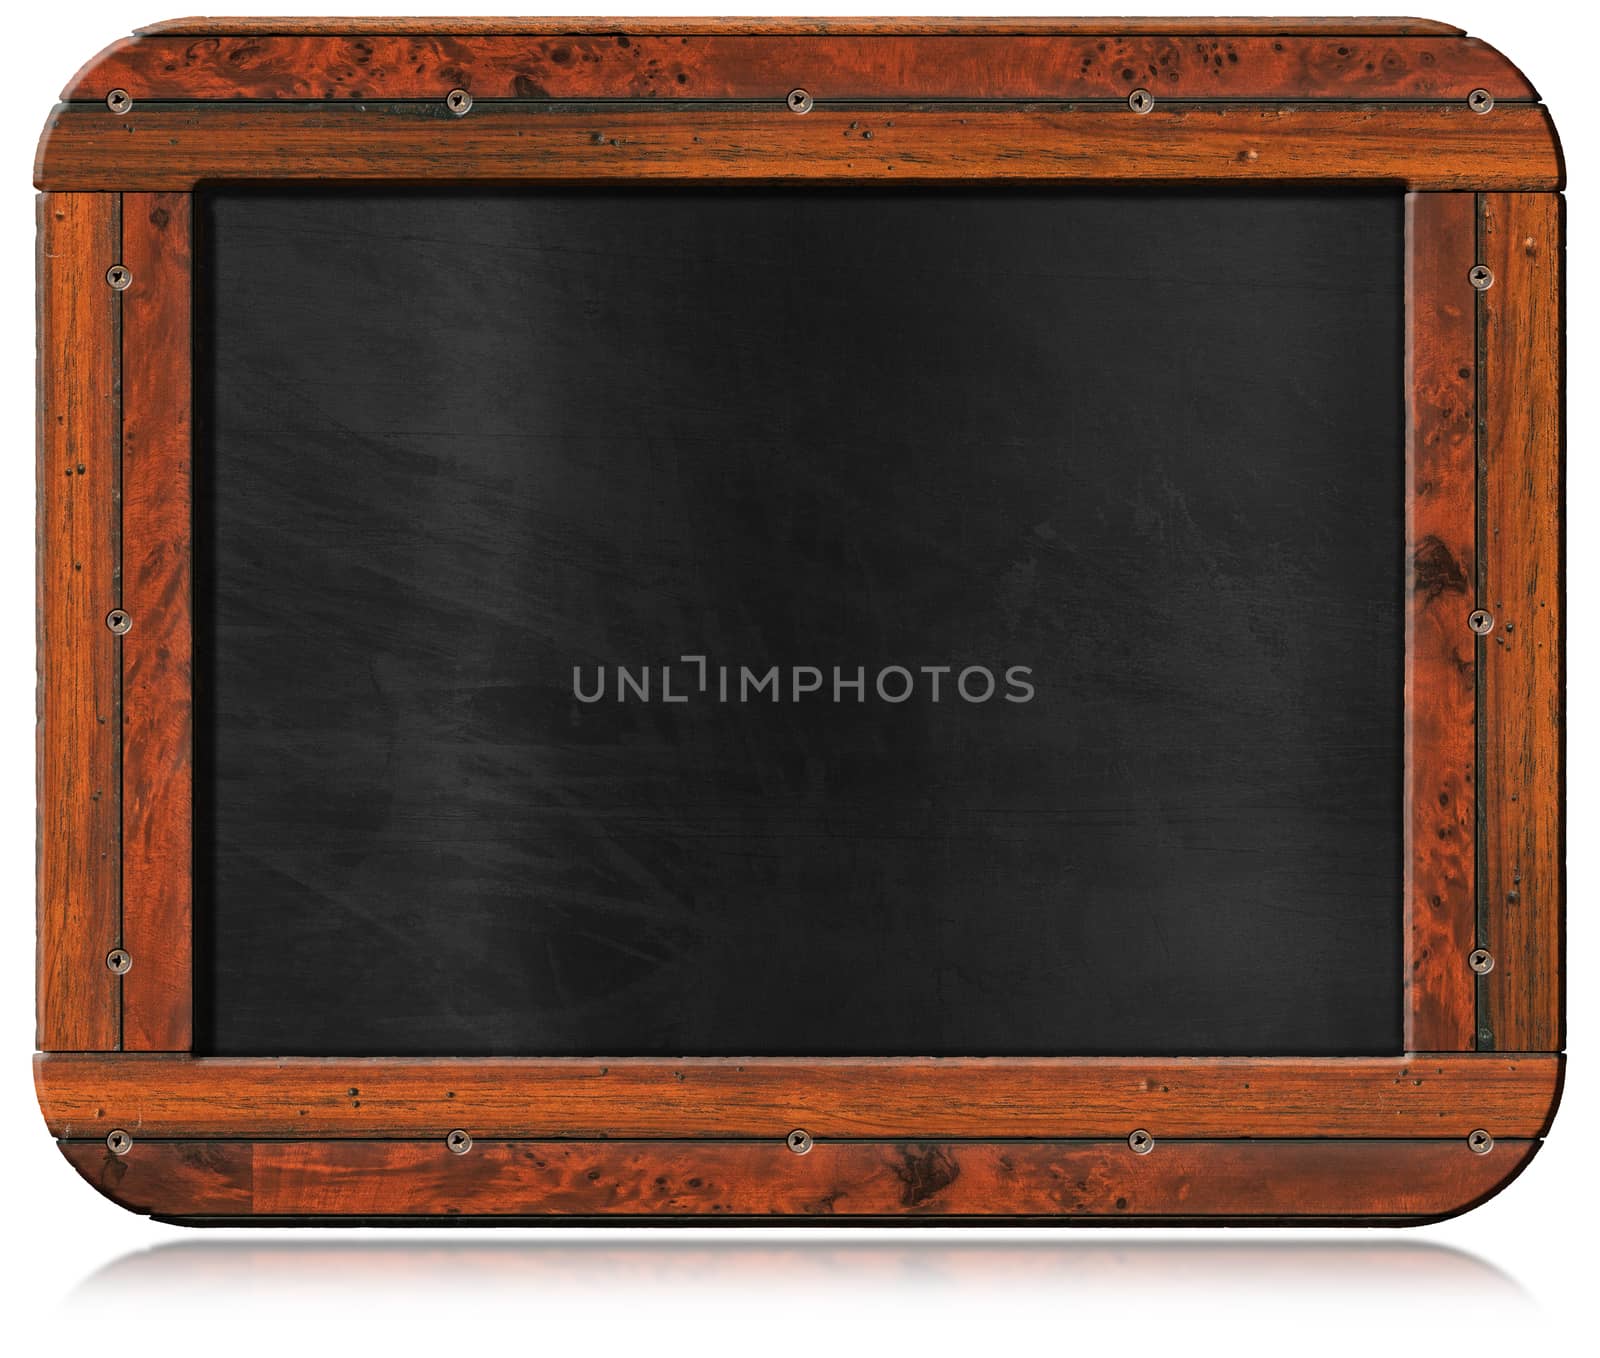 Old blank blackboard with wooden rectangular frame and screws. Isolated on white background